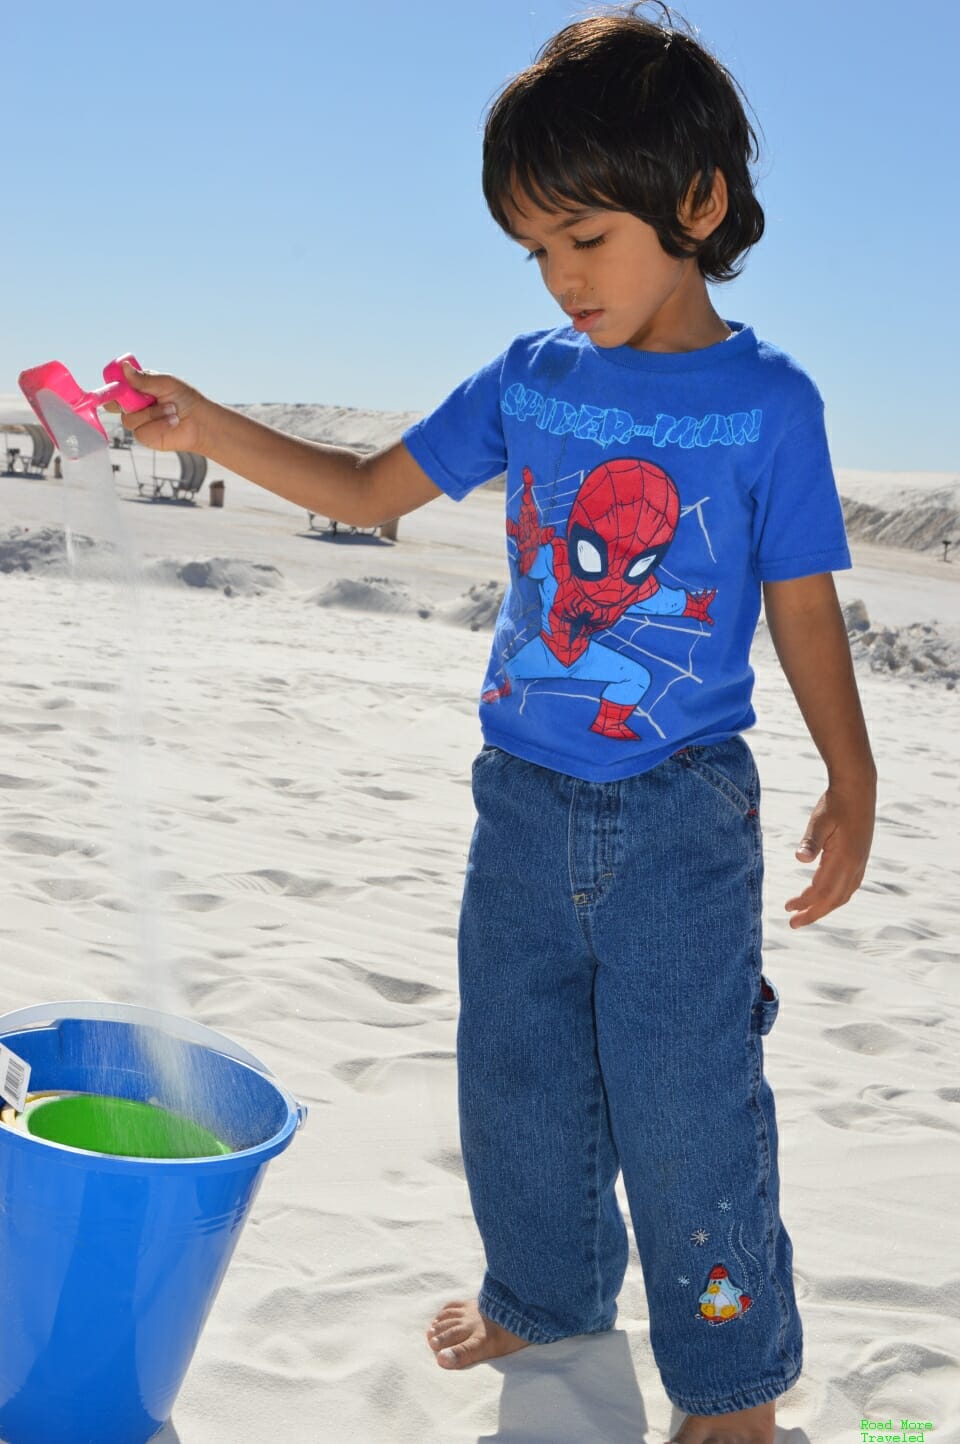 White Sands of New Mexico - digging in the sands